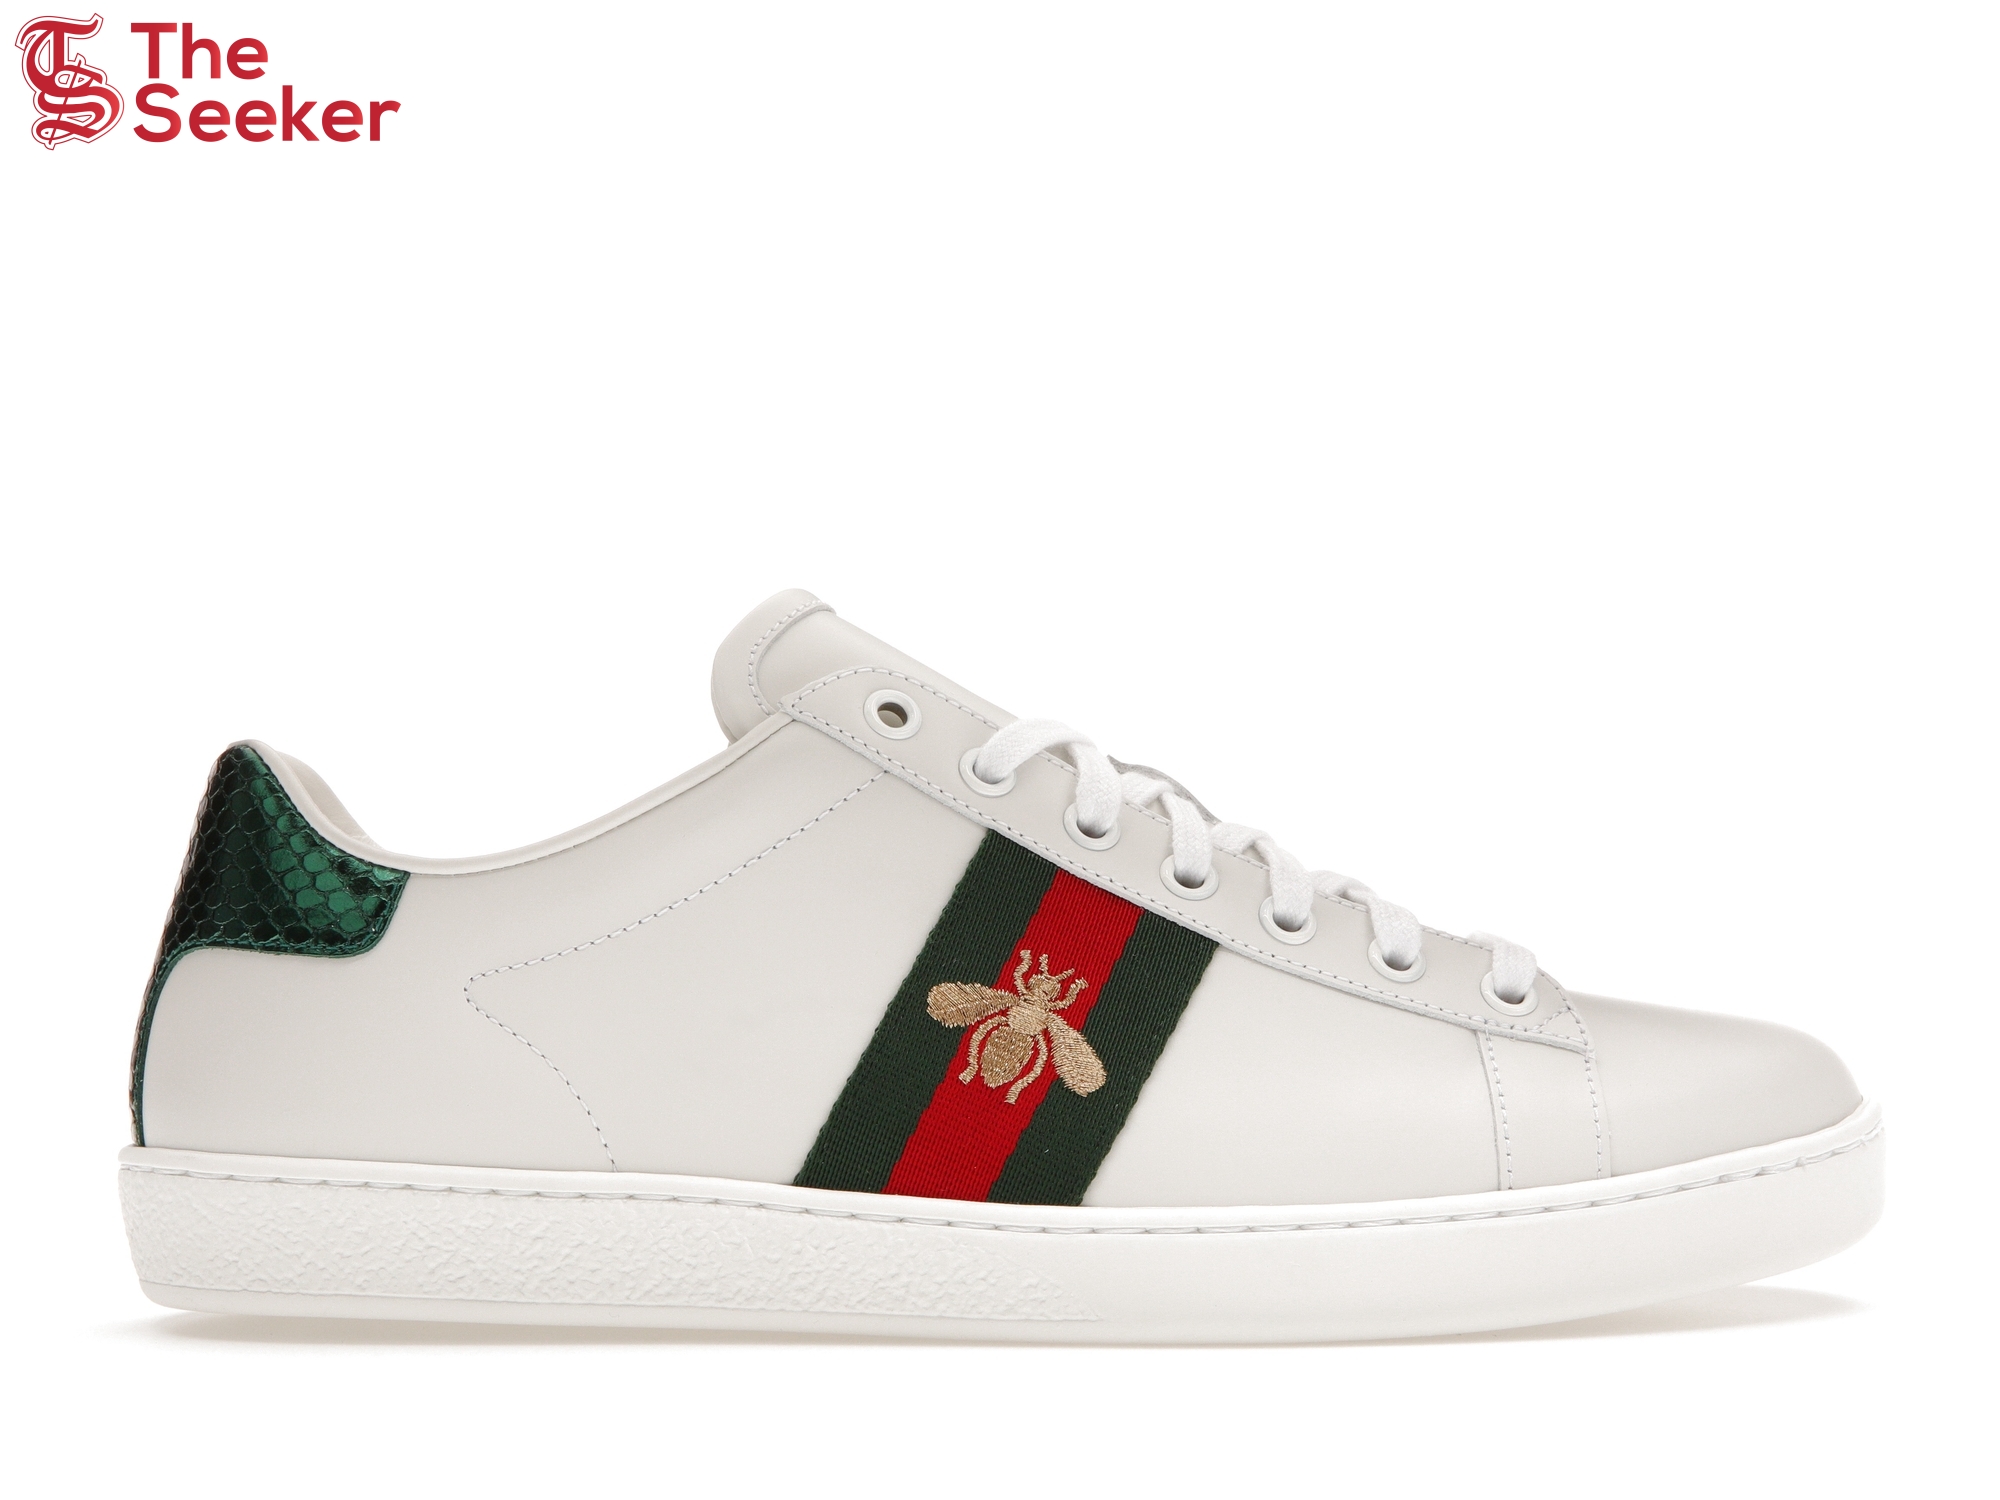 Gucci Ace Bee (Women's)